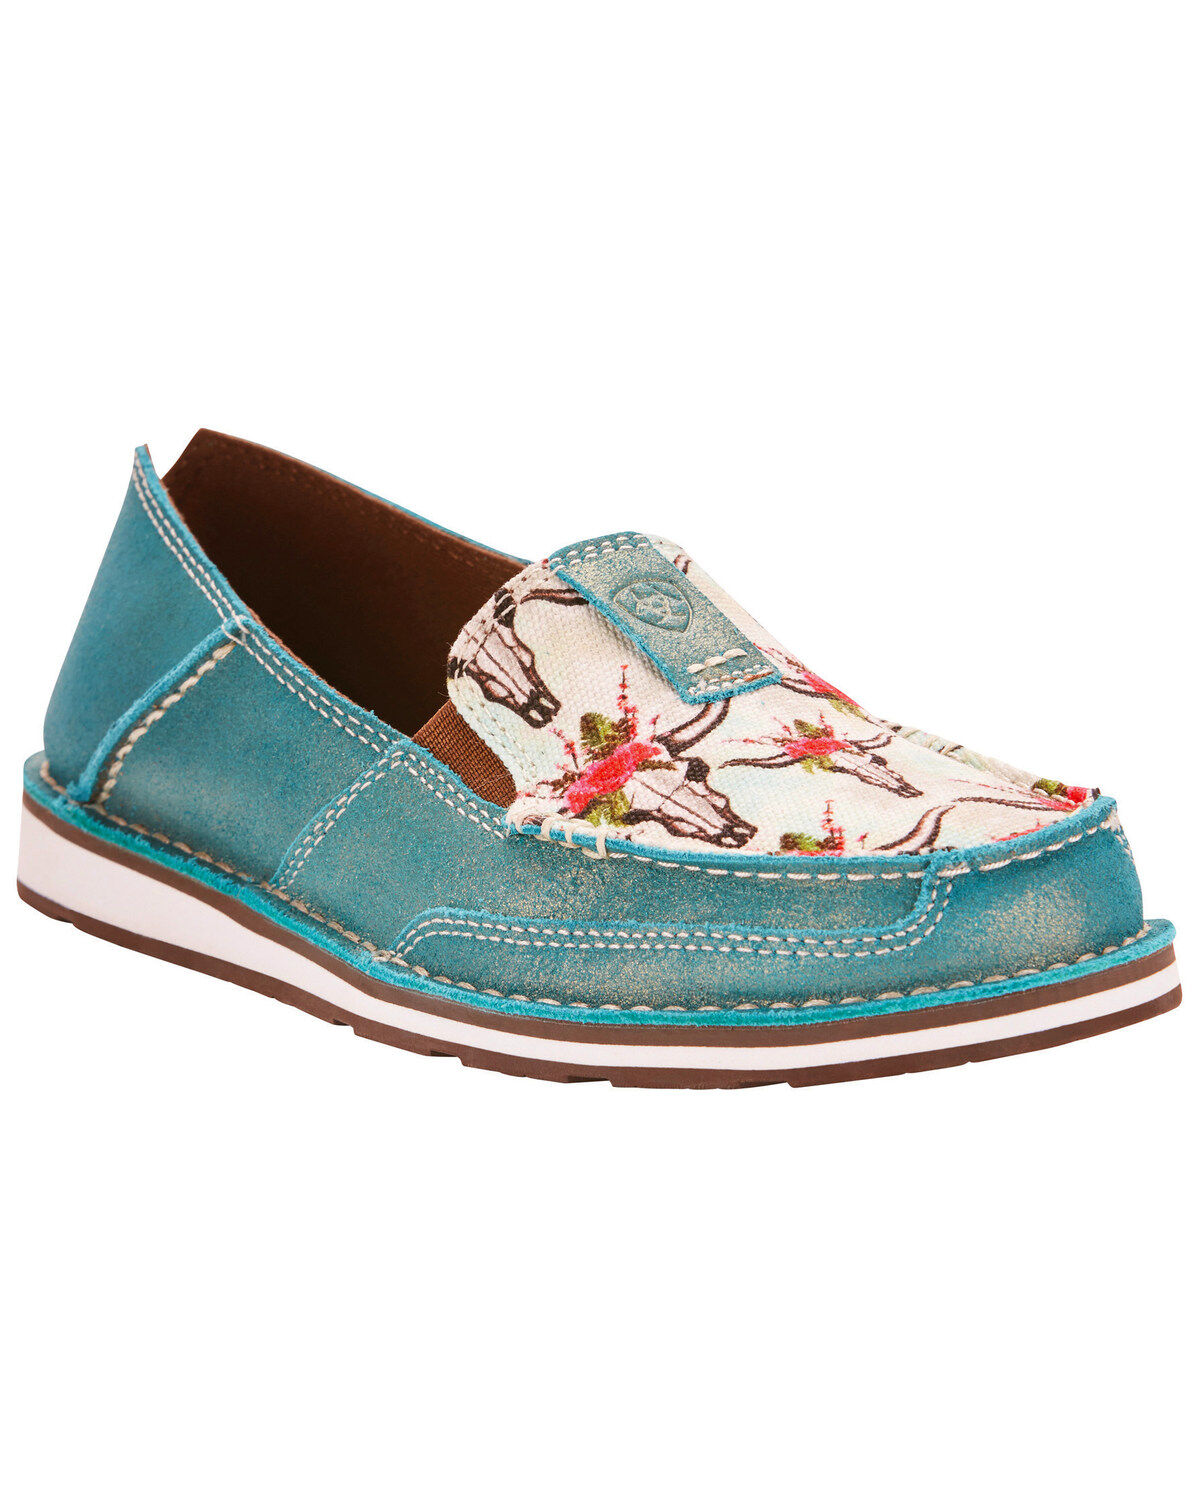 Ariat Women's Turquoise Cruiser Shoes 